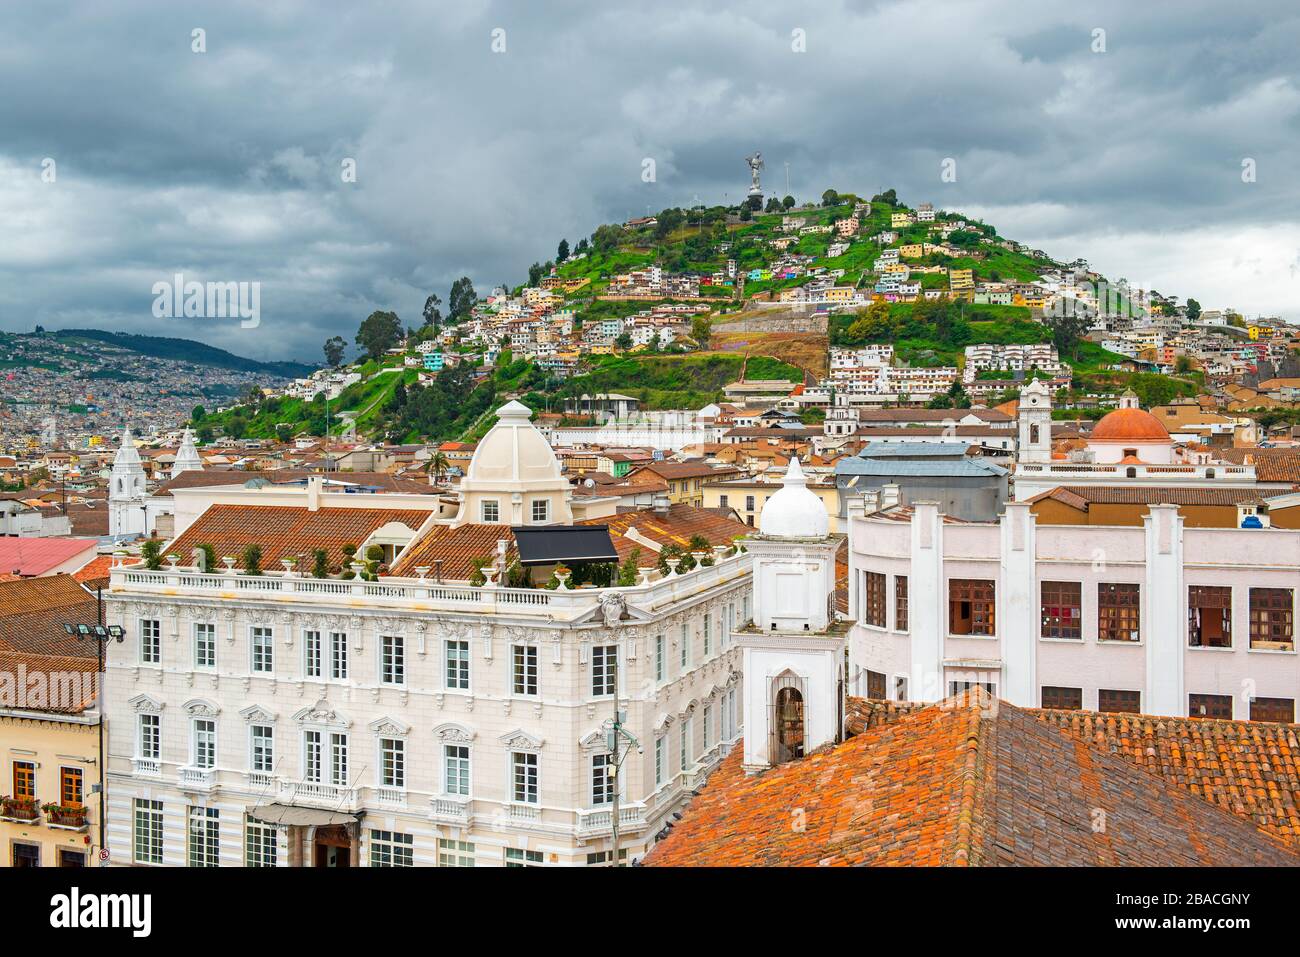 Cityscape of Quito with the historic city center in colonial style architecture and the Panecillo hill with Virgin of Quito, Ecuador. Stock Photo